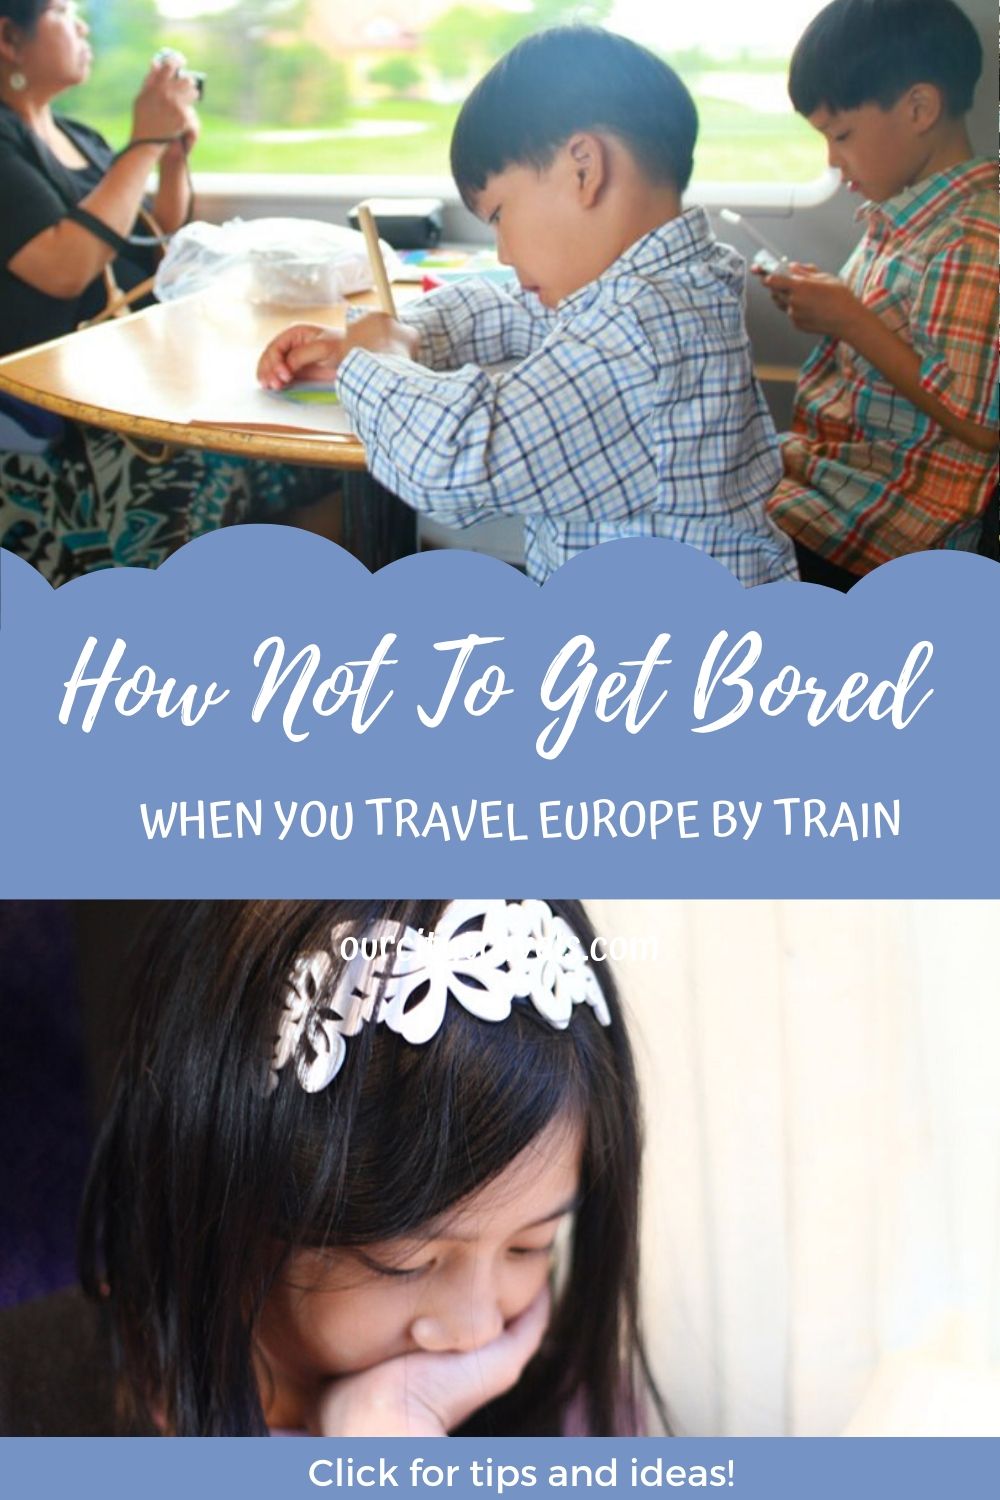 How Not To Get Bored When You Travel Europe by Train, travel europe